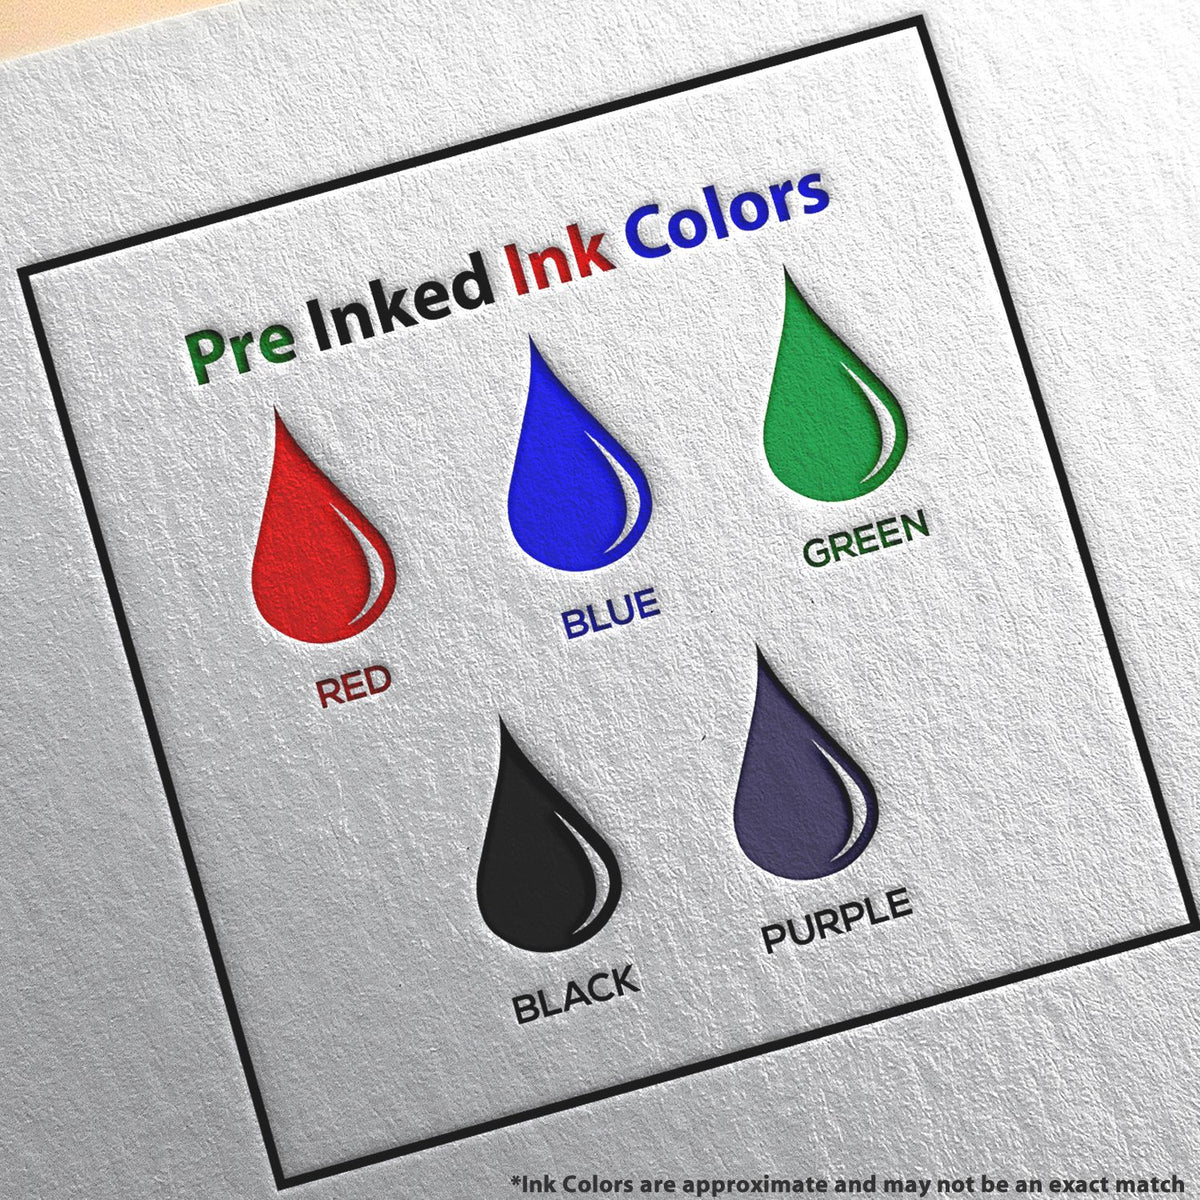 A picture showing the different ink colors or hues available for the Slim Pre-Inked Oklahoma Professional Geologist Seal Stamp